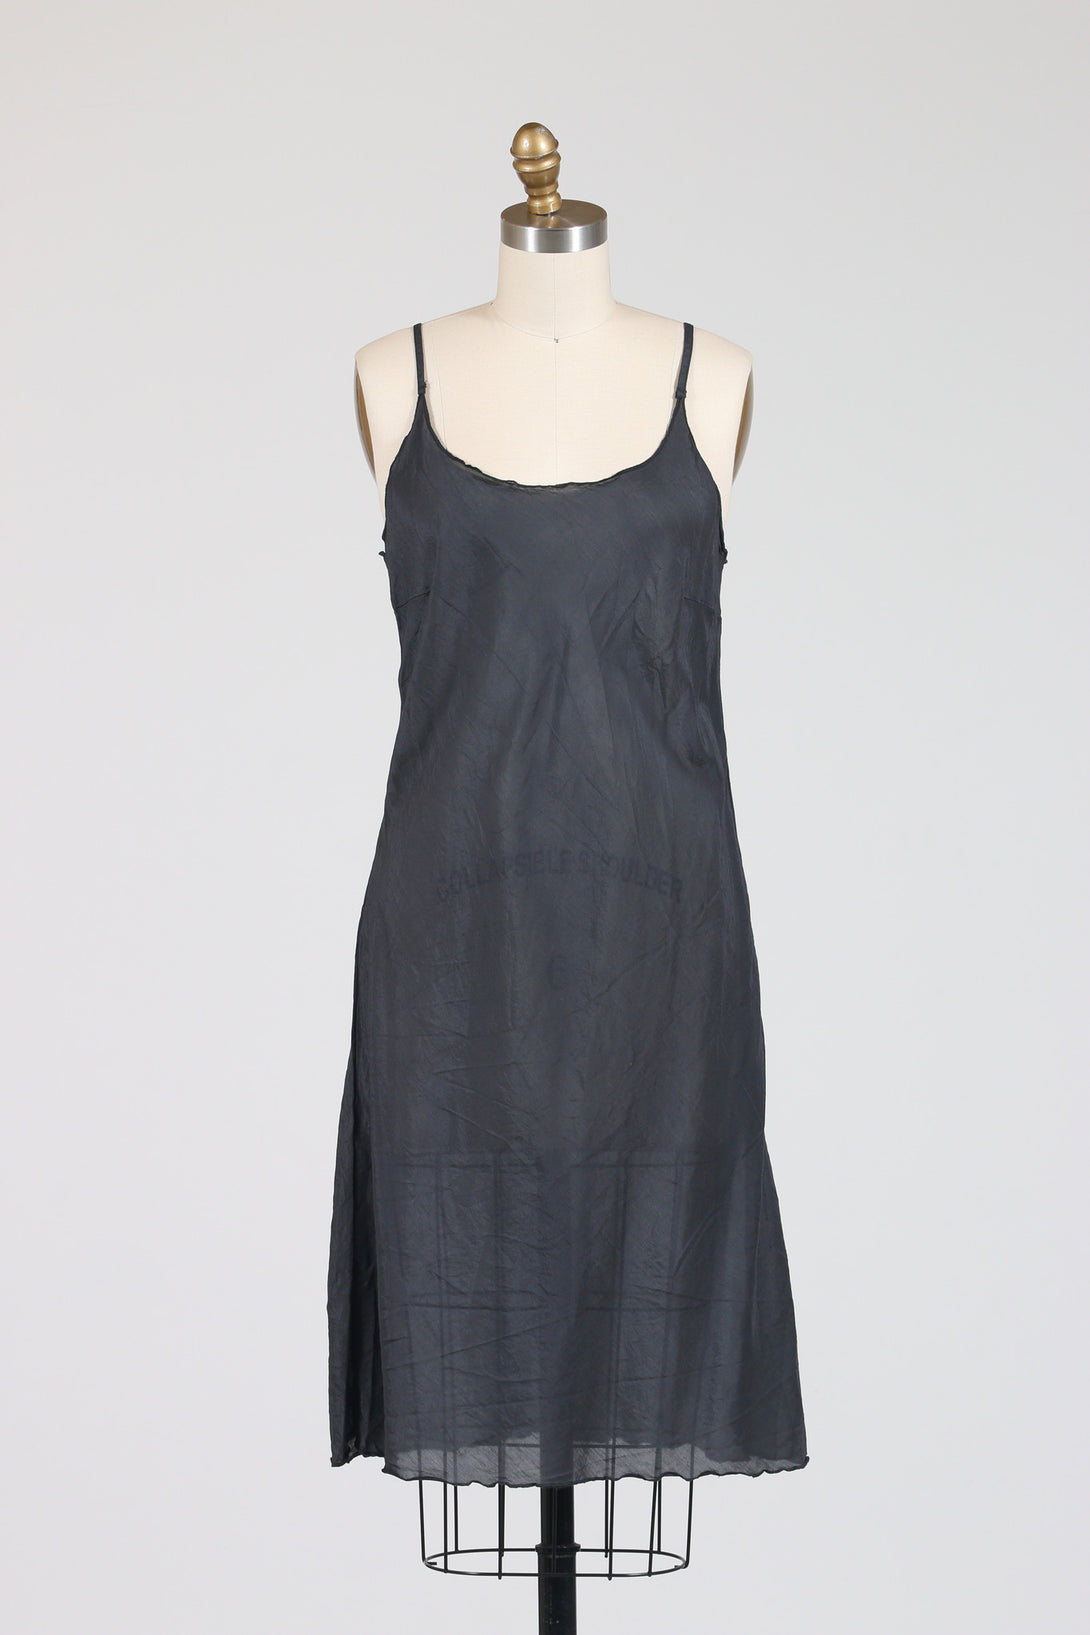 CP Shades Faye Slip is a slip dress made out of bias cut cotton-silk.